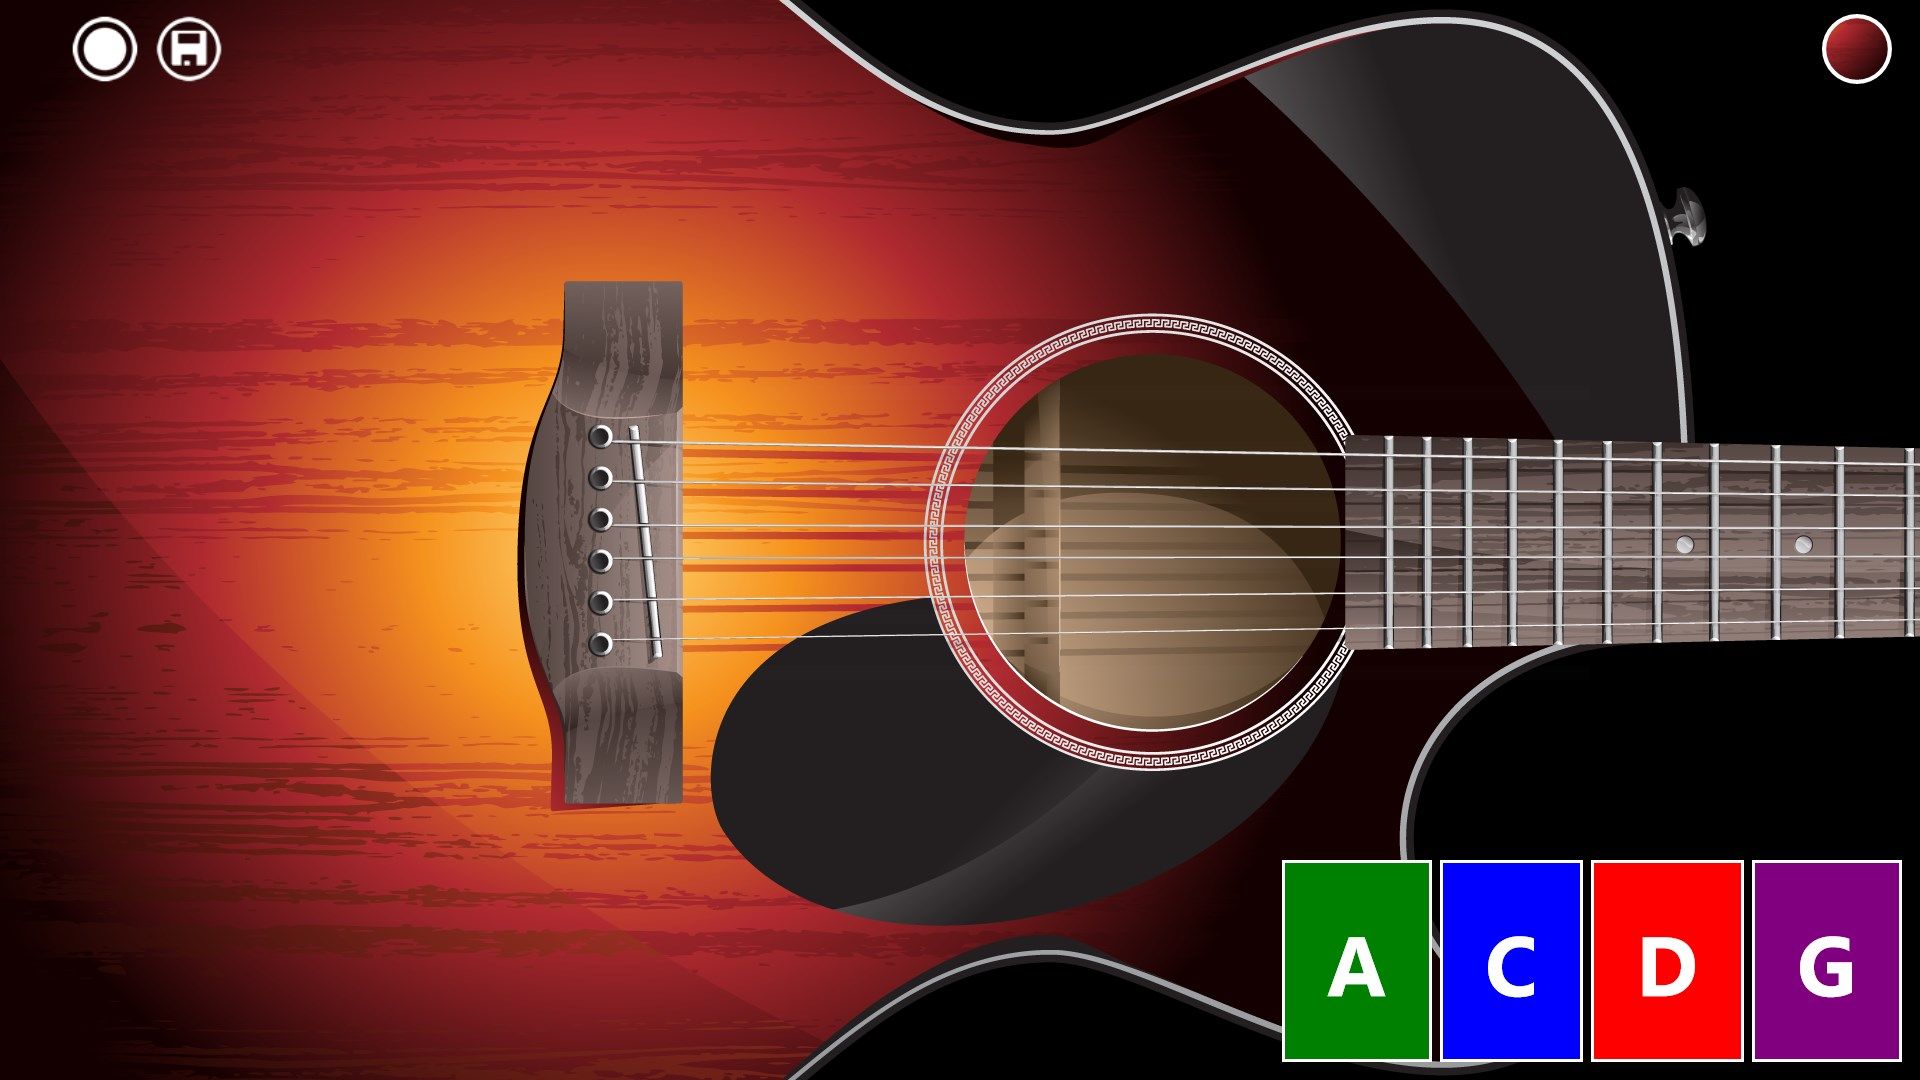 Customize your guitar with different styles